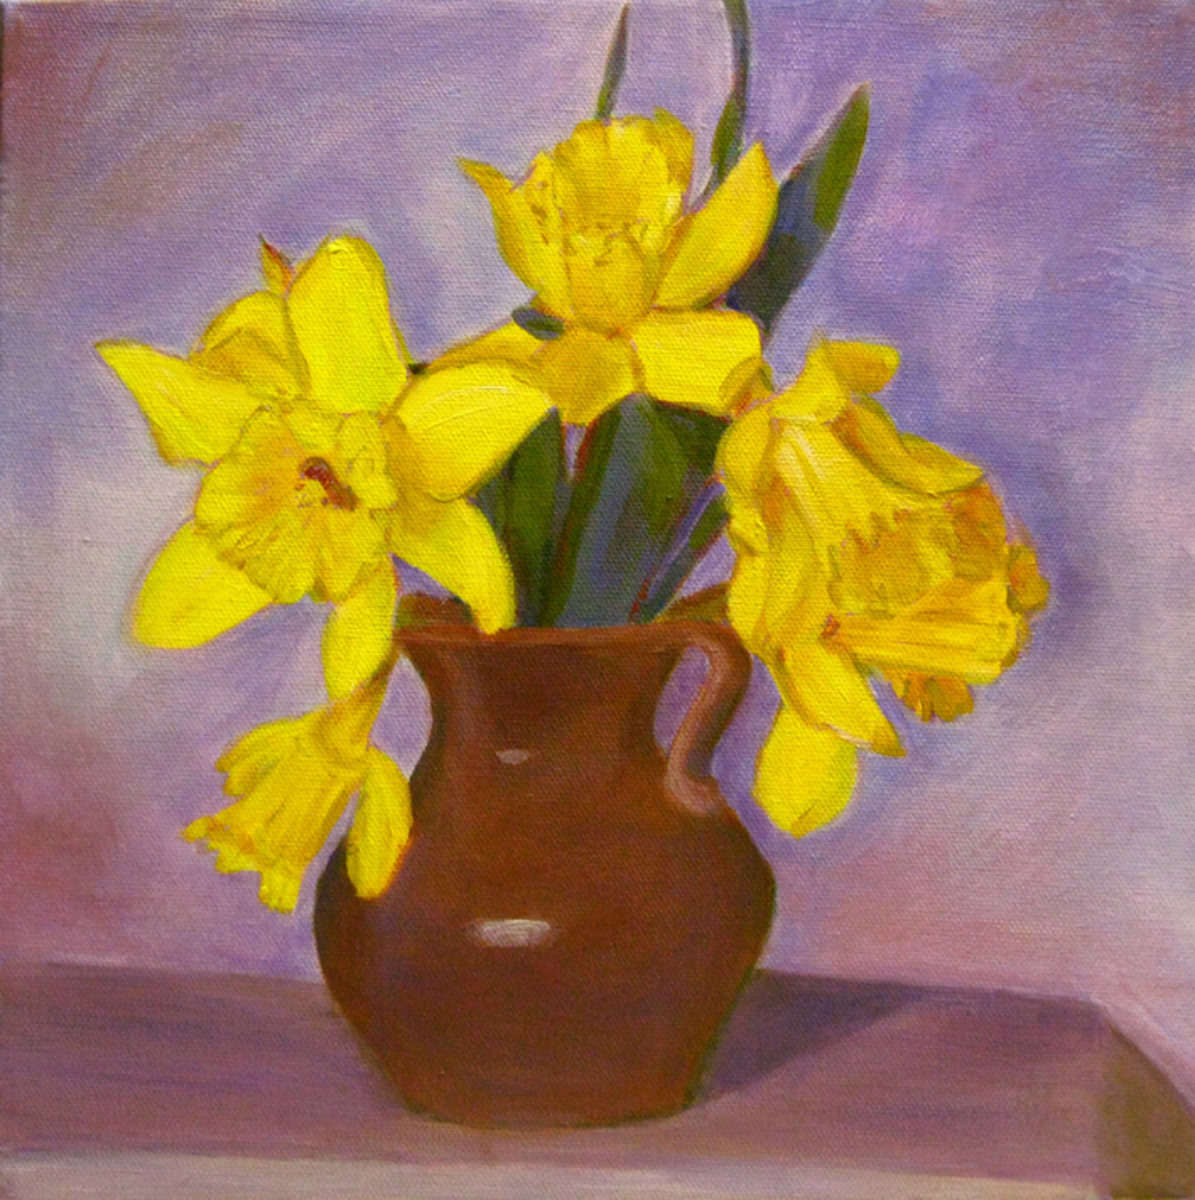 "Daffodils" (acrylic on canvas by Robie Benve) This is an example of the use of complementary colors (opposites on the color wheel) like yellow and violet (the source link is to my blog).